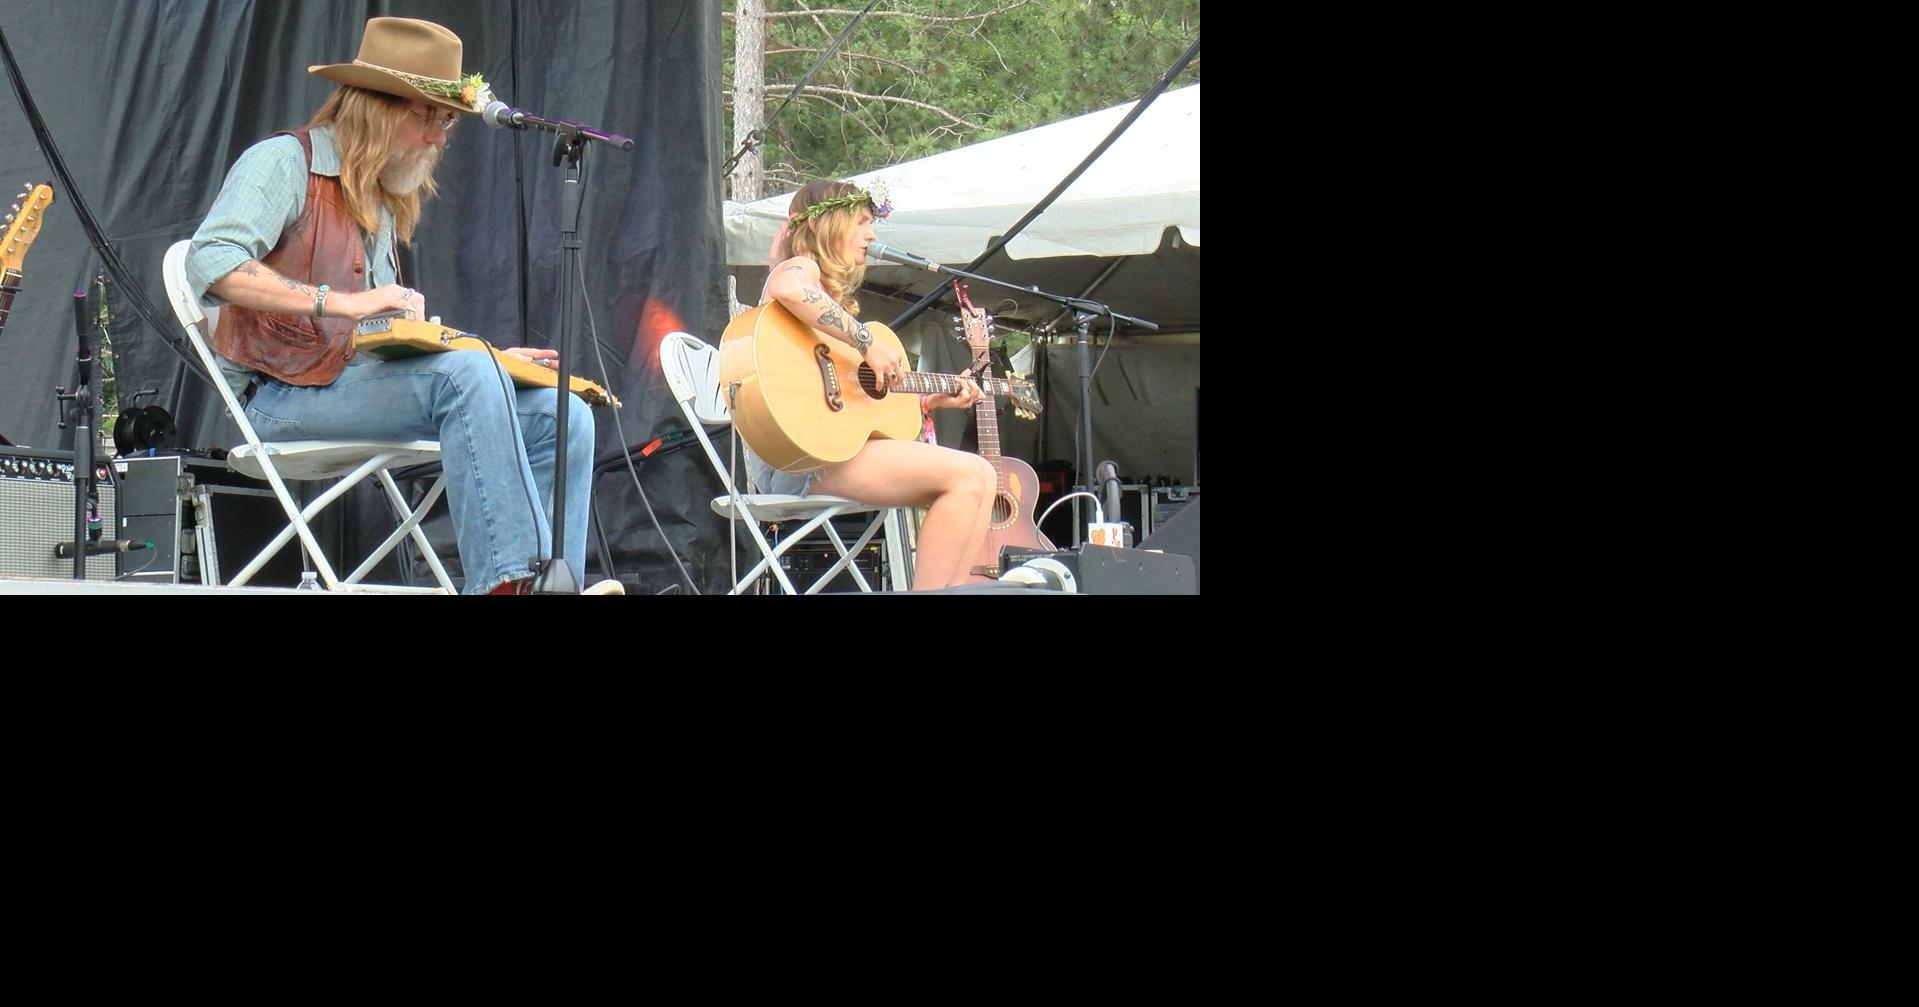 Blue Ox Music Festival celebrates 10 years; host bandmember reflects on the journey | Positively Chippewa Valley